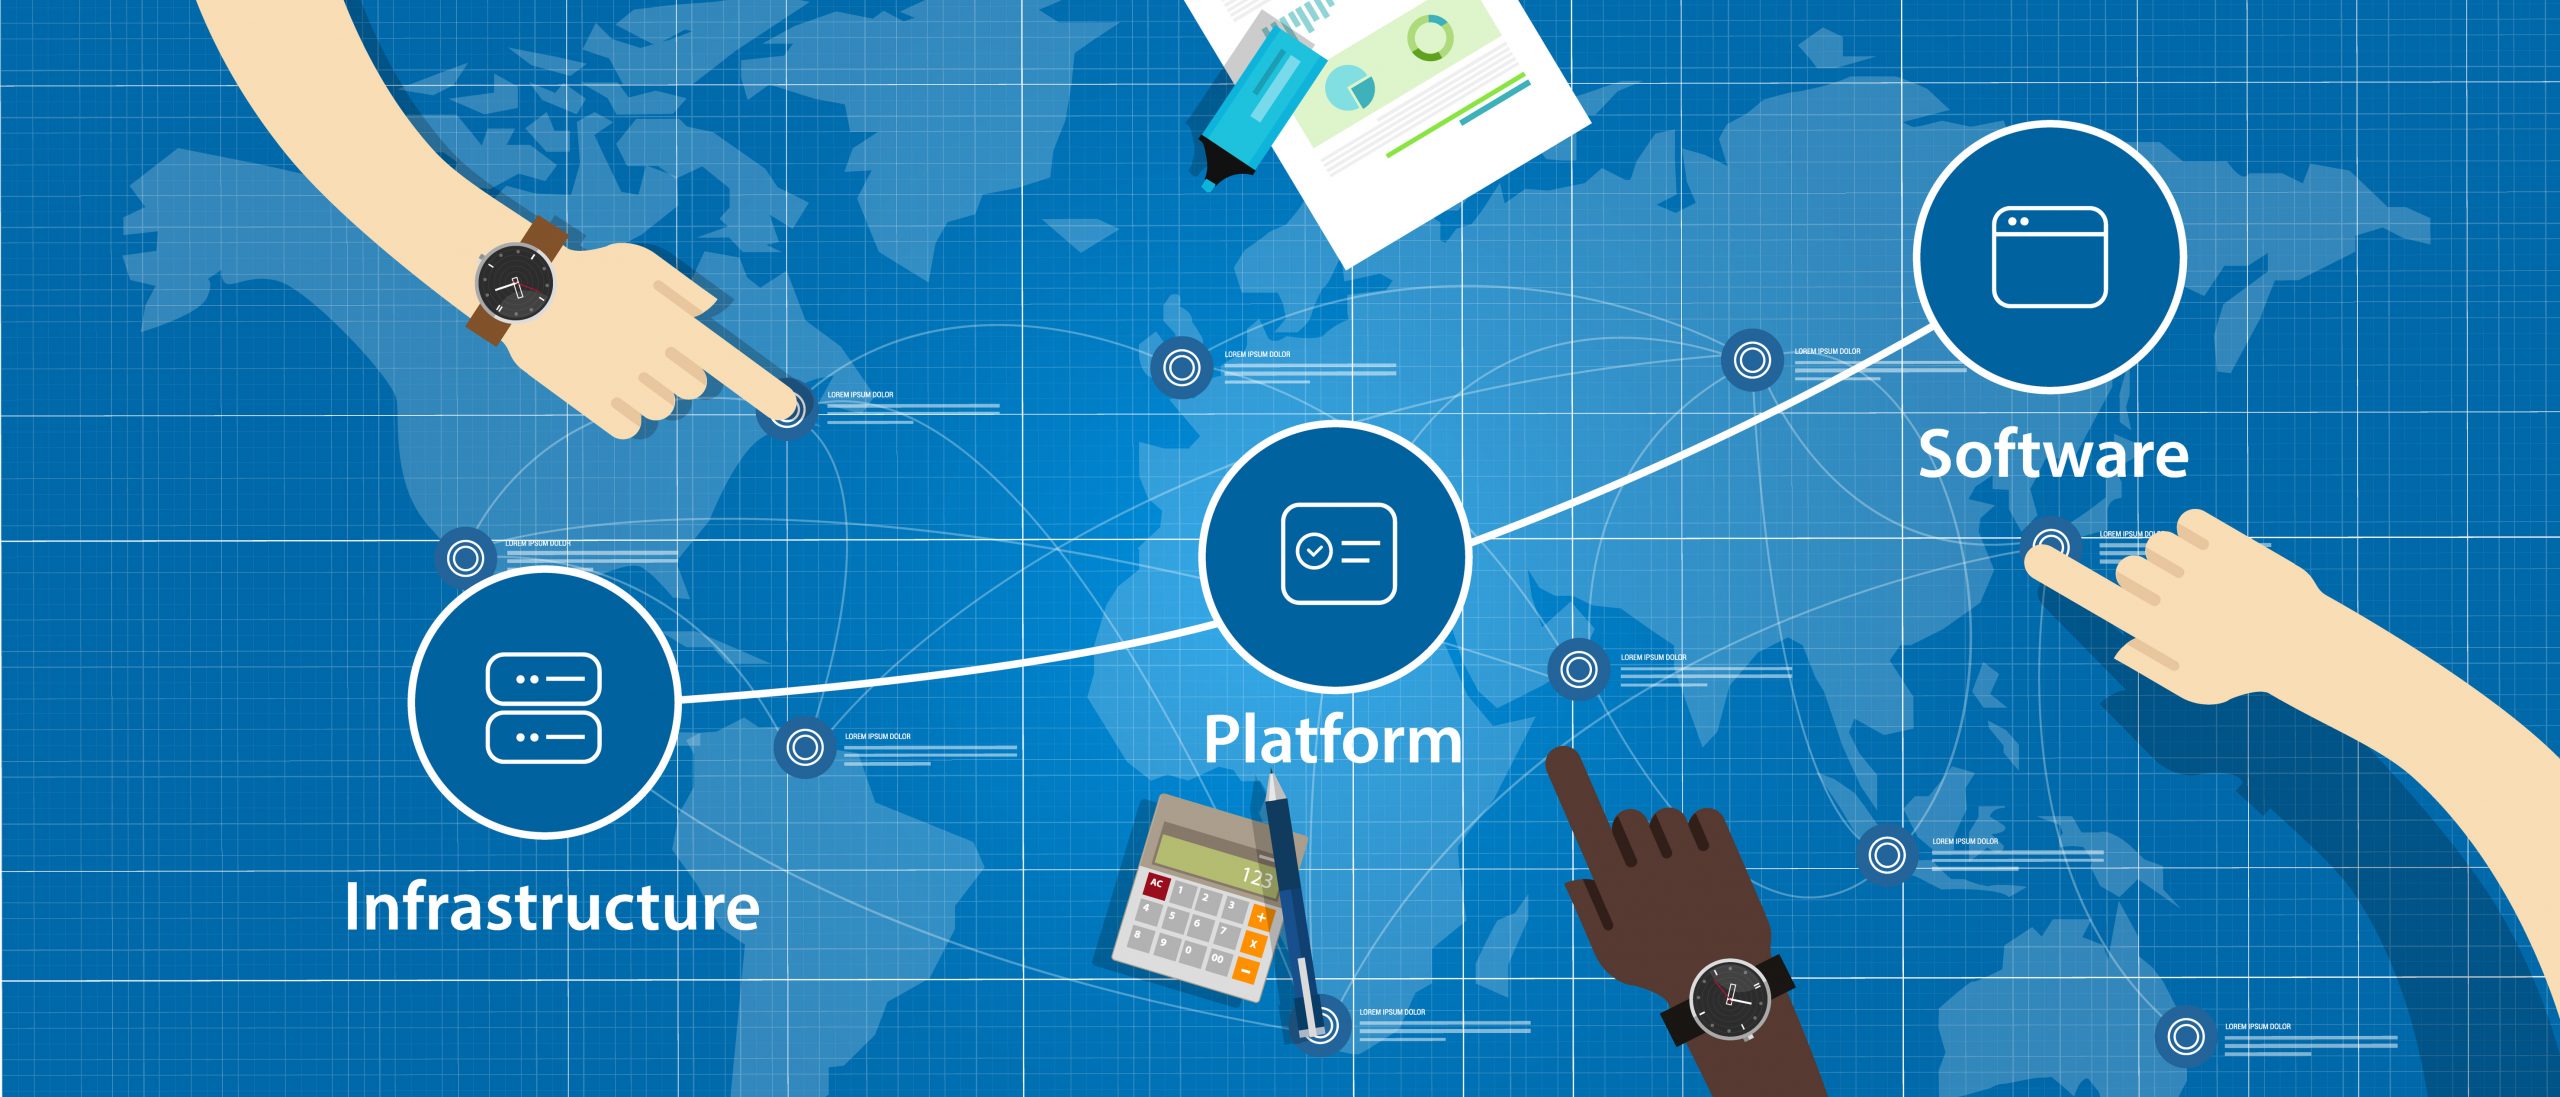 Vector graphic of hands pointing to cloud computing elements with icons for Infrastructure, Platform, and Software on a digital world map background, symbolizing the components of cloud services.